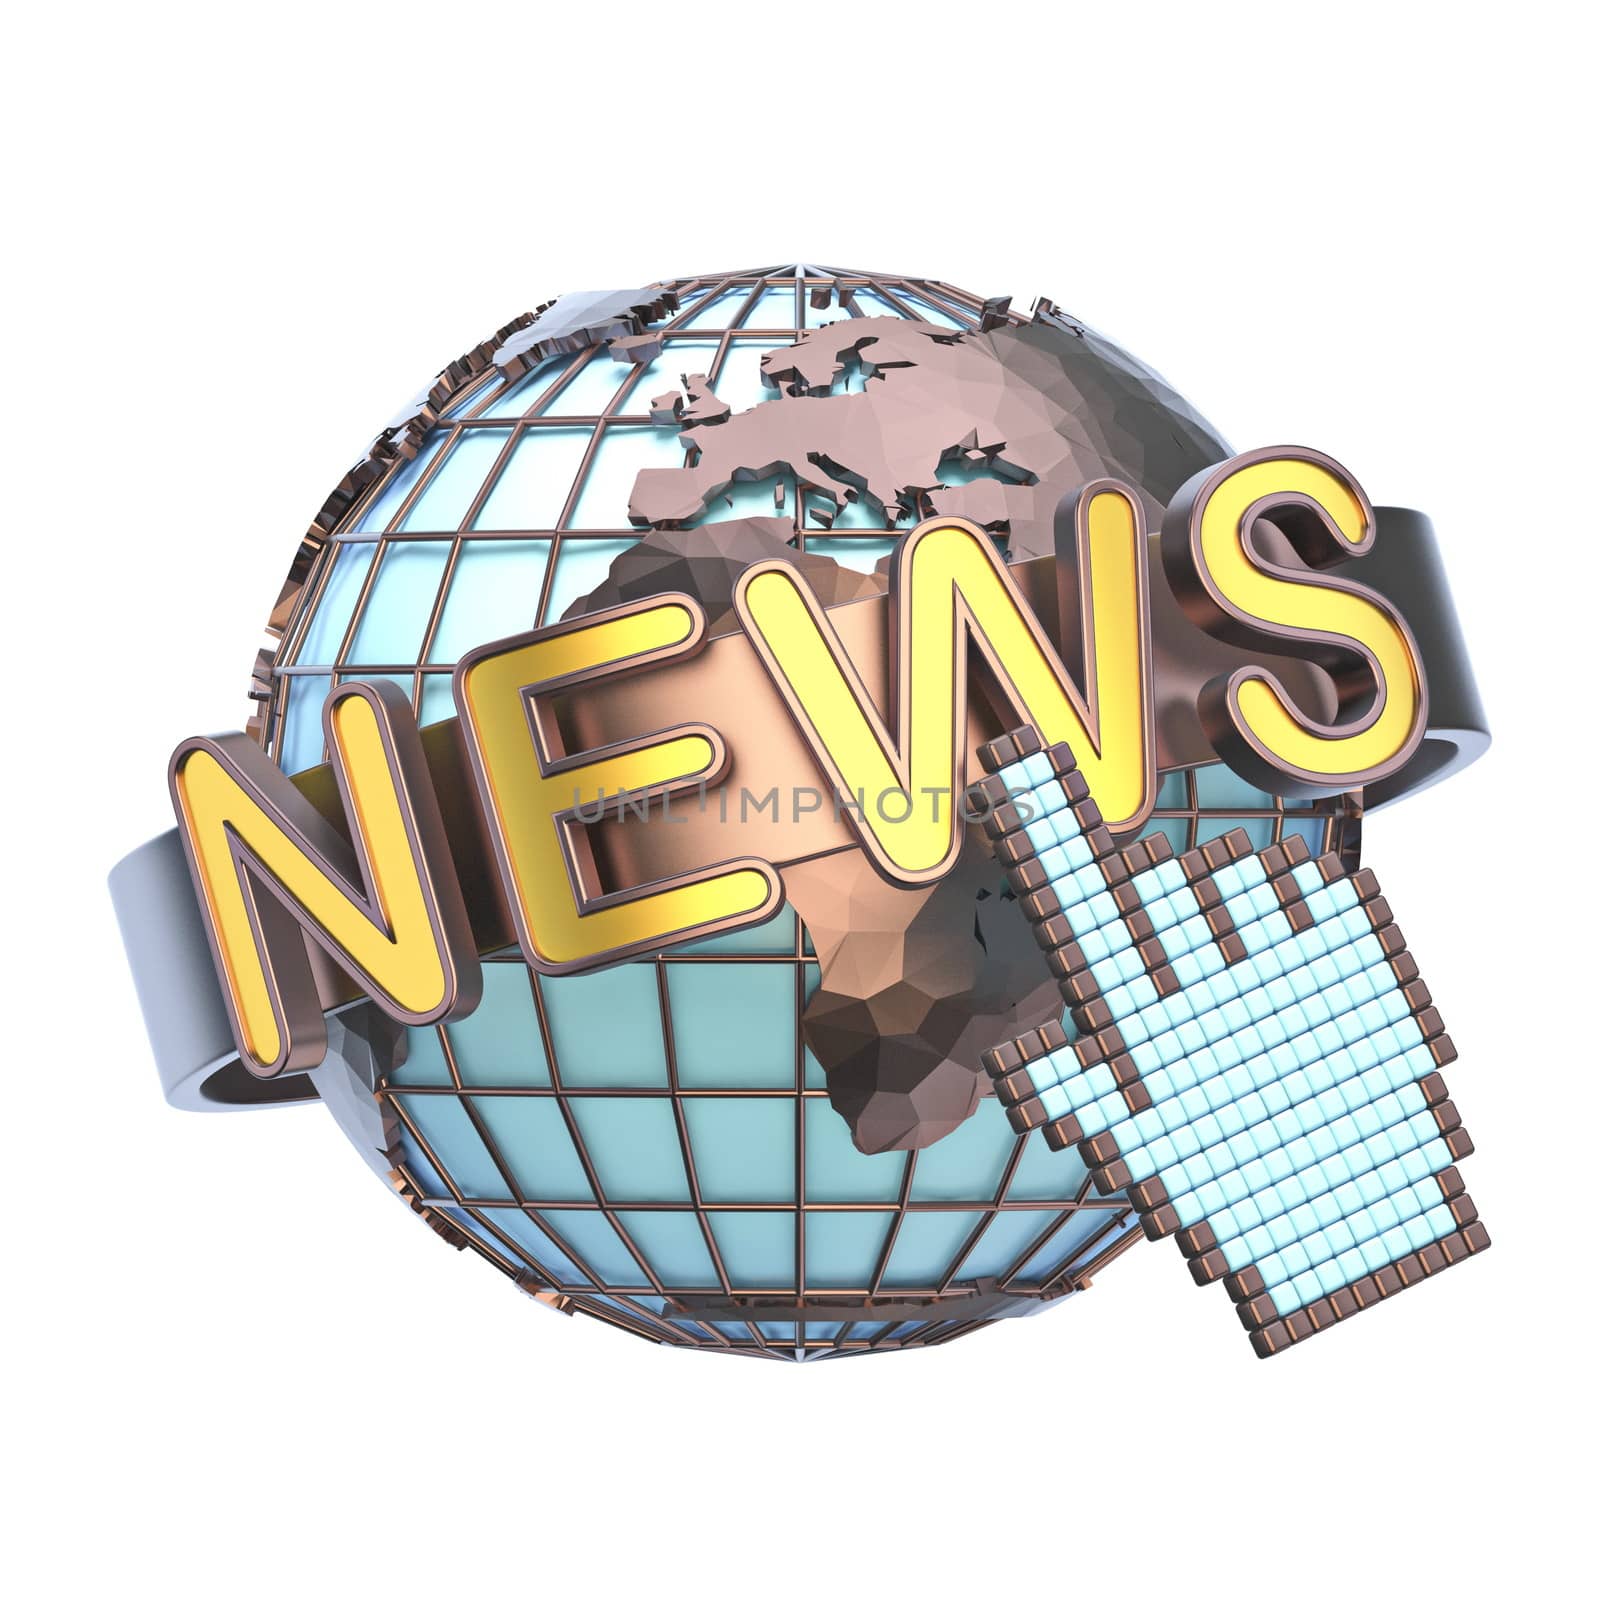 NEWS concept with earth globe 3D render illustration isolated on white background